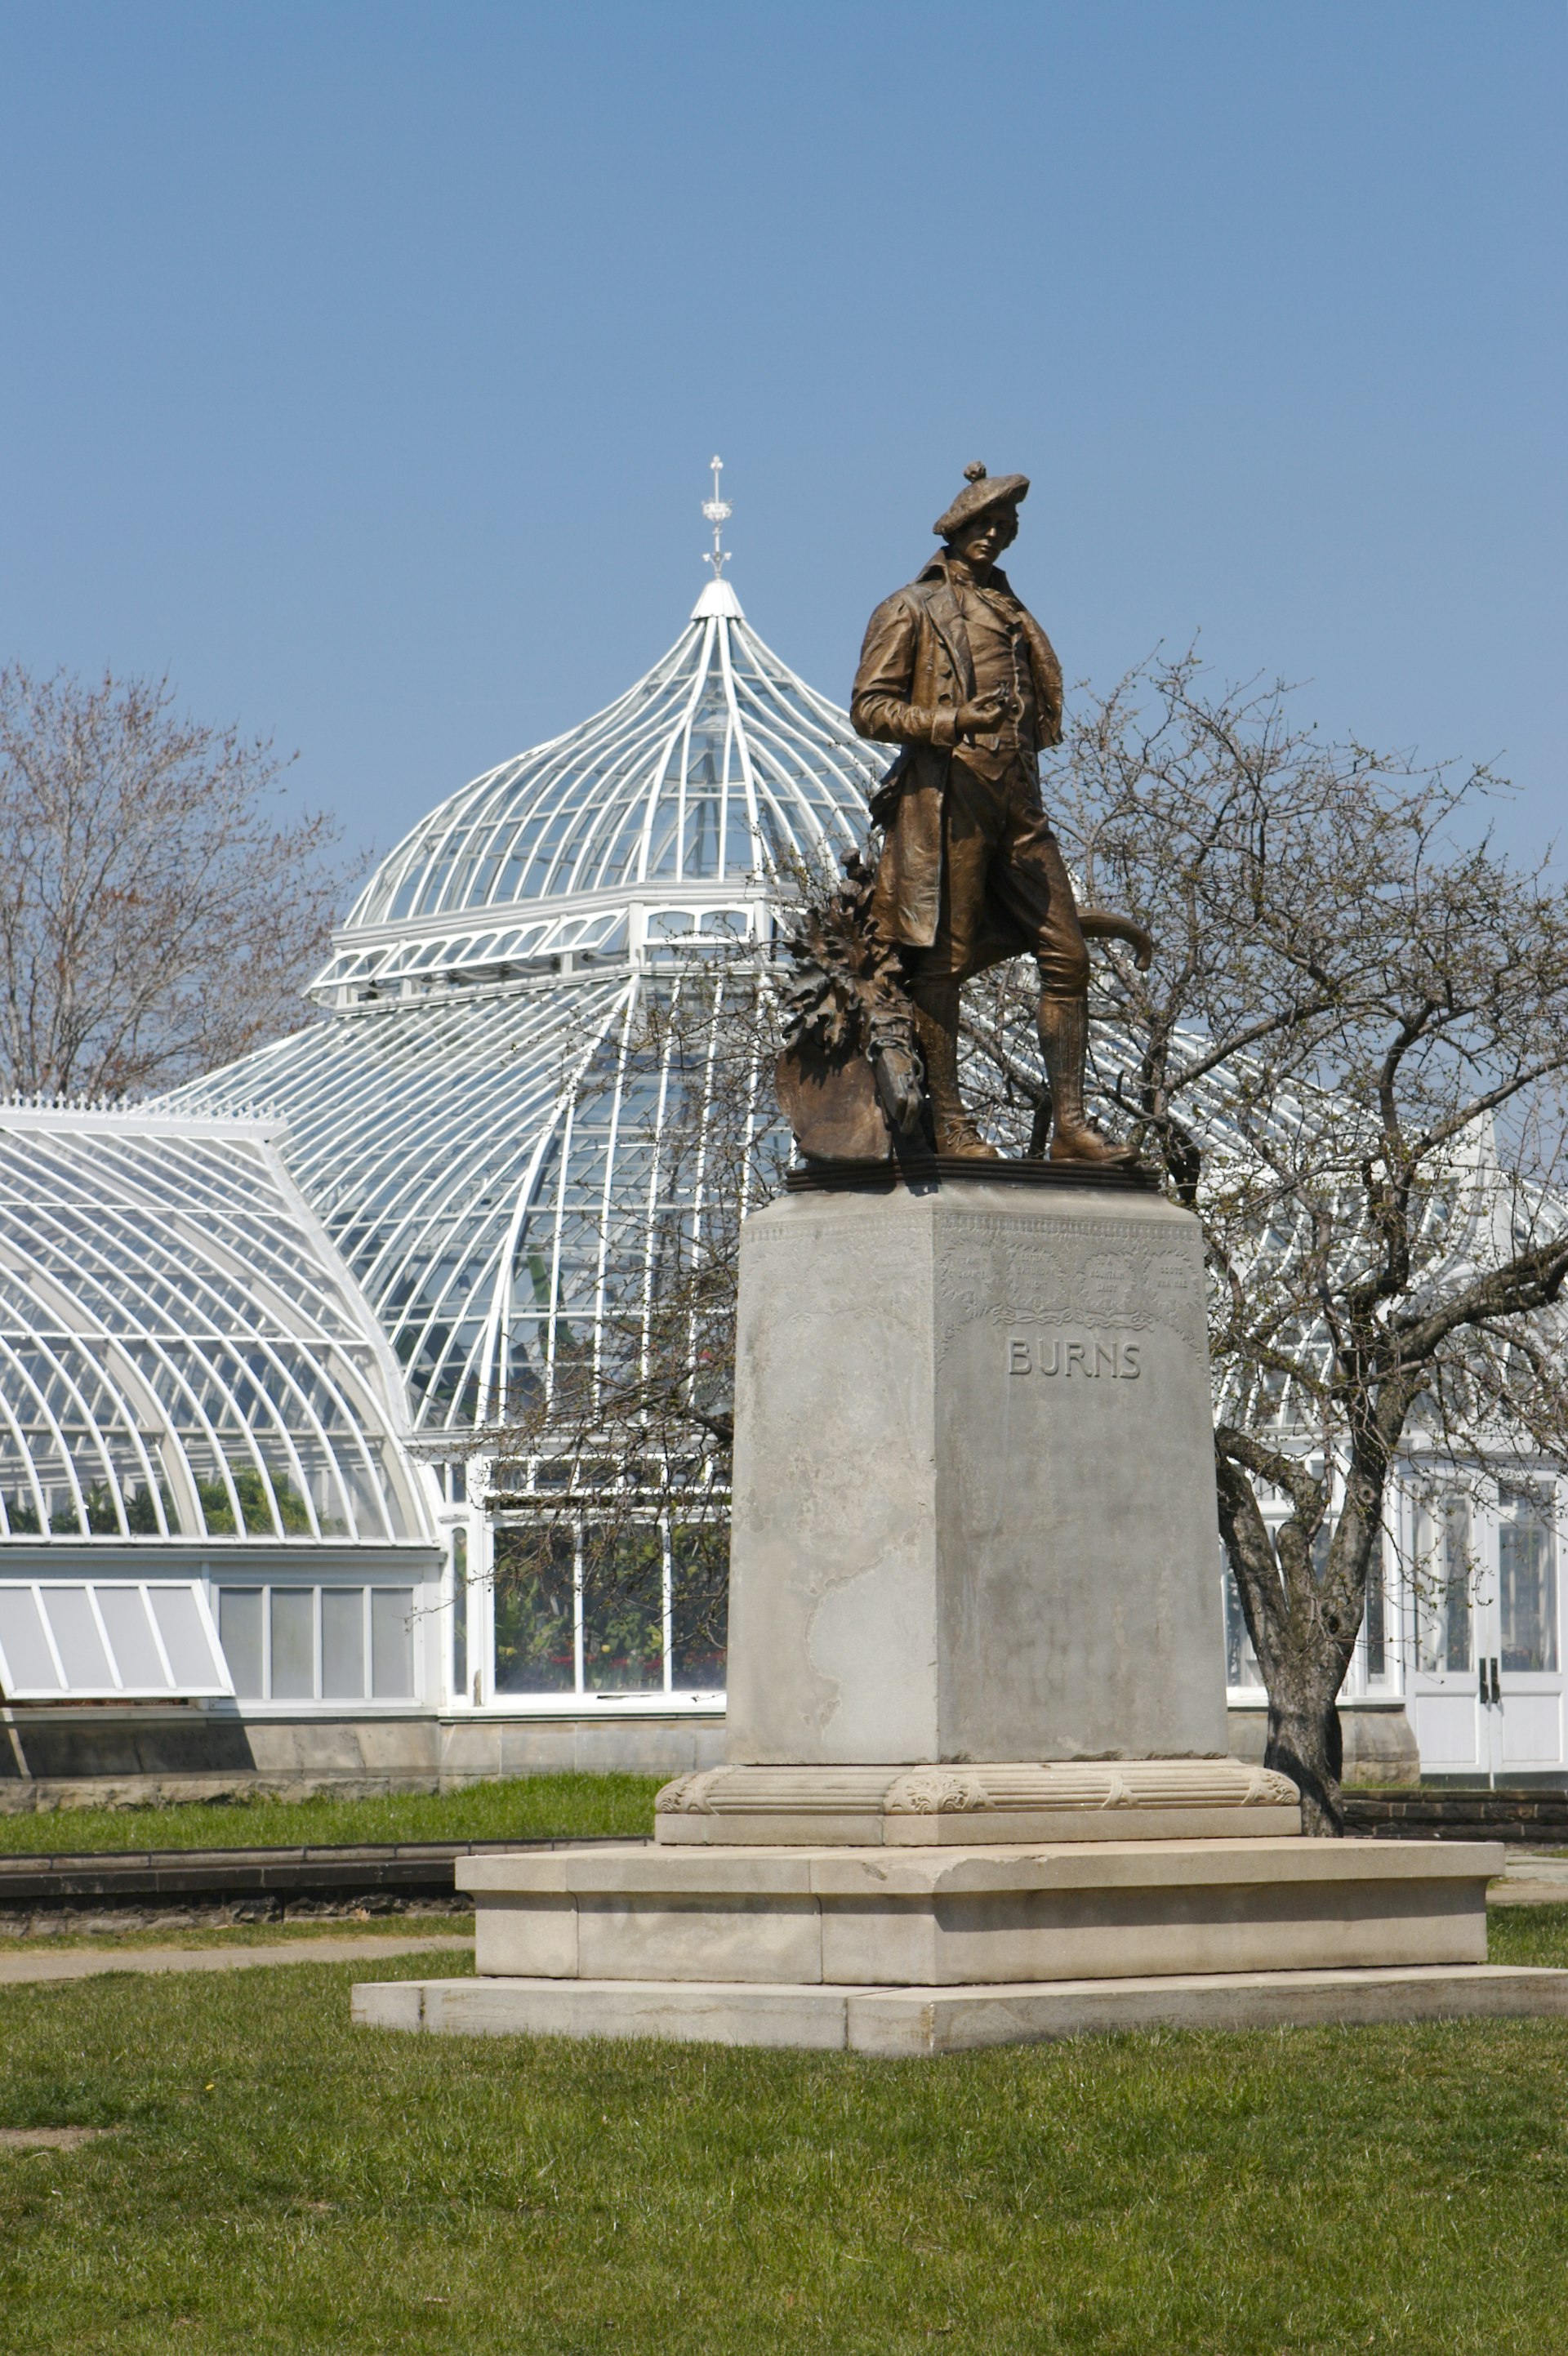 A bronze statue of a man wearing a hat, a large coat and knickerbockers stands in front of a glass green house at the Phipps Conservatory and Botanical Gardens in Pittsburgh.